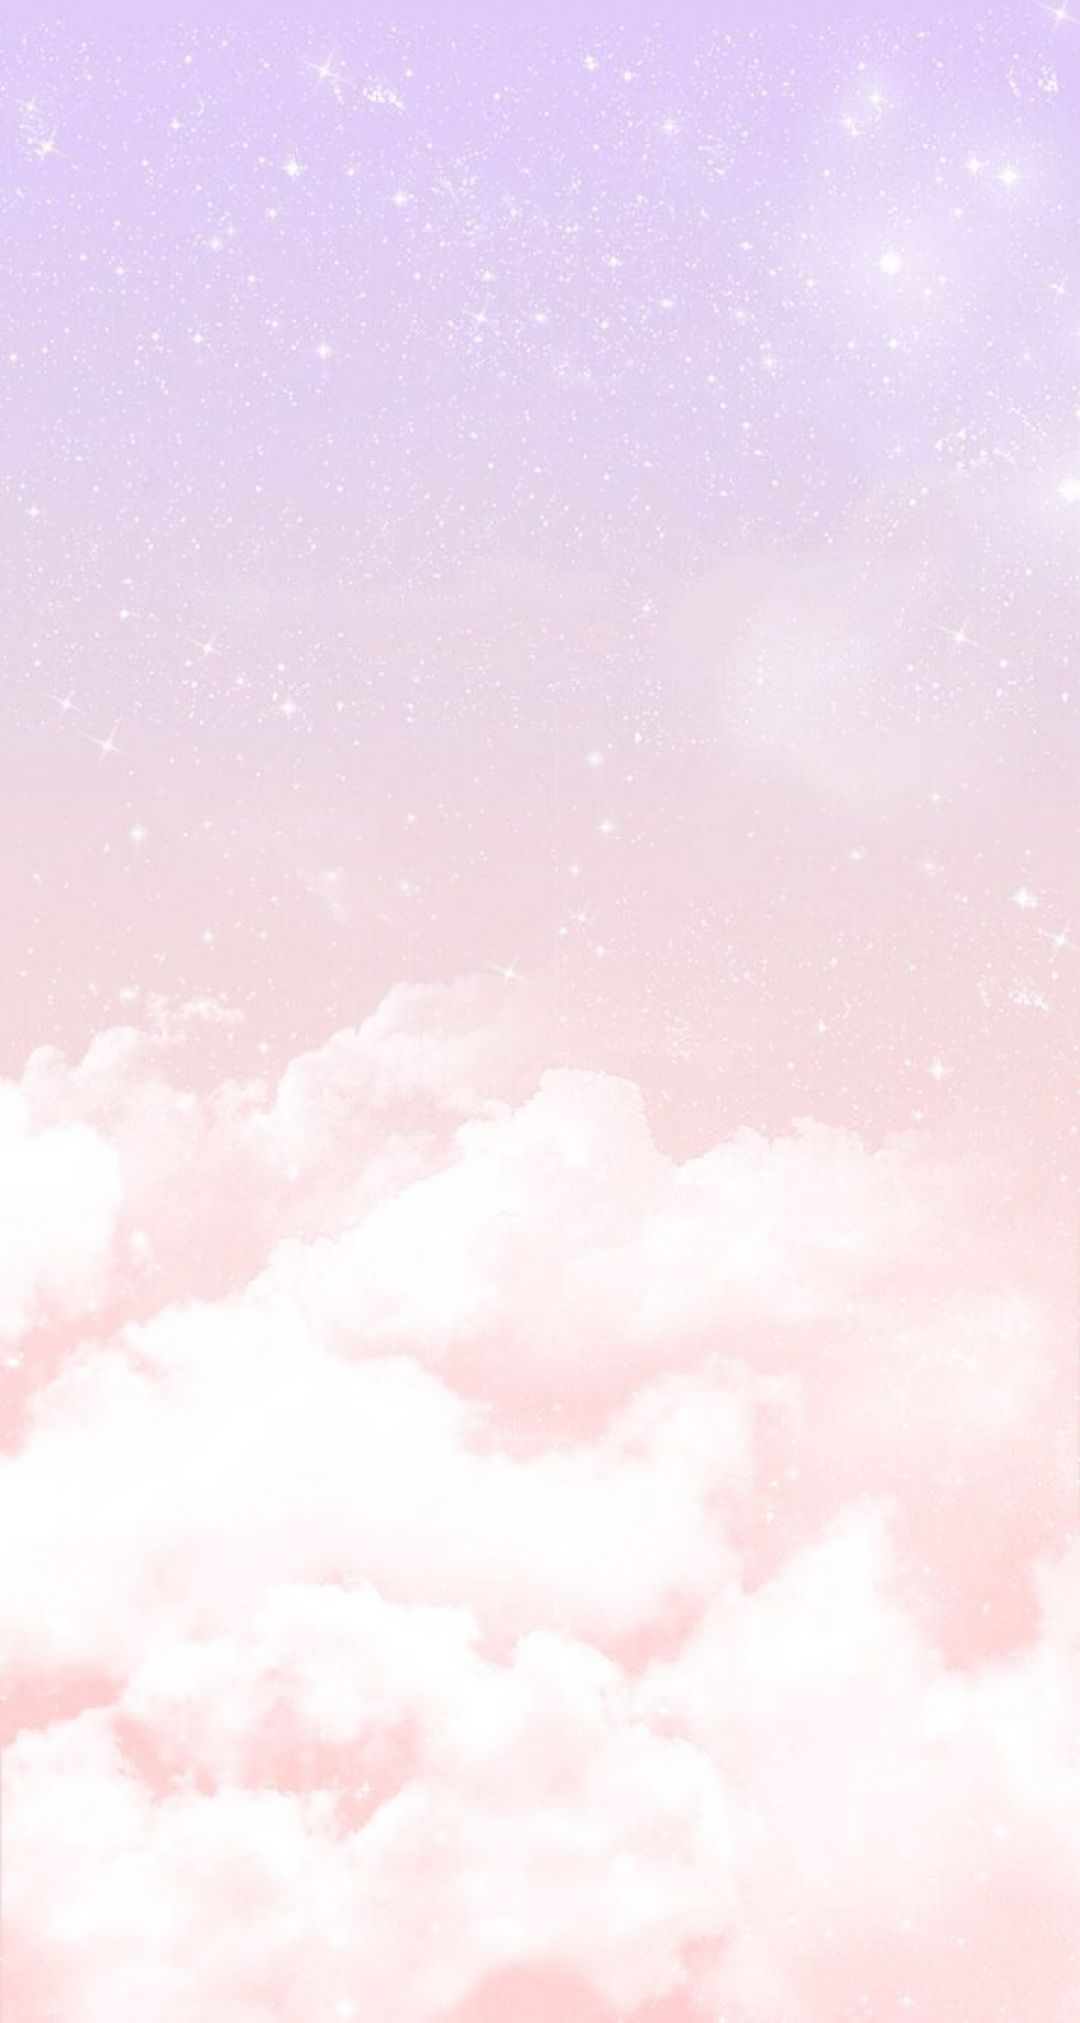 ✓[70+] Pastel Pink - Android, iPhone, Desktop HD Backgrounds / Wallpapers  (1080p, 4k) (png / jpg) (2023)